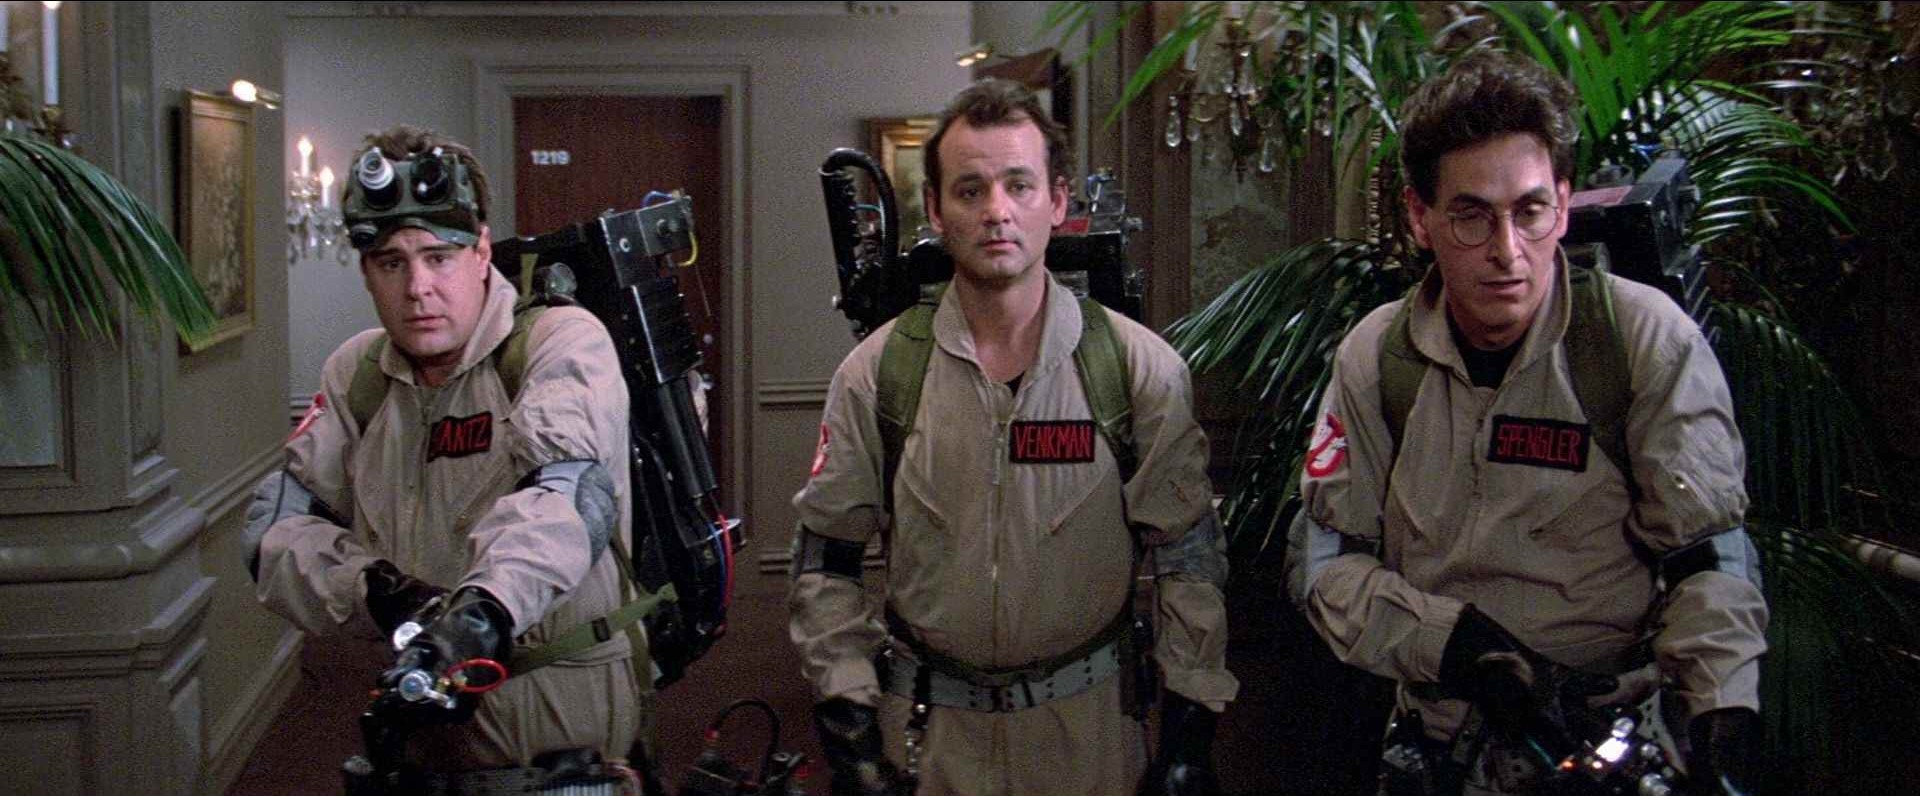 There's Time - Ghostbusters